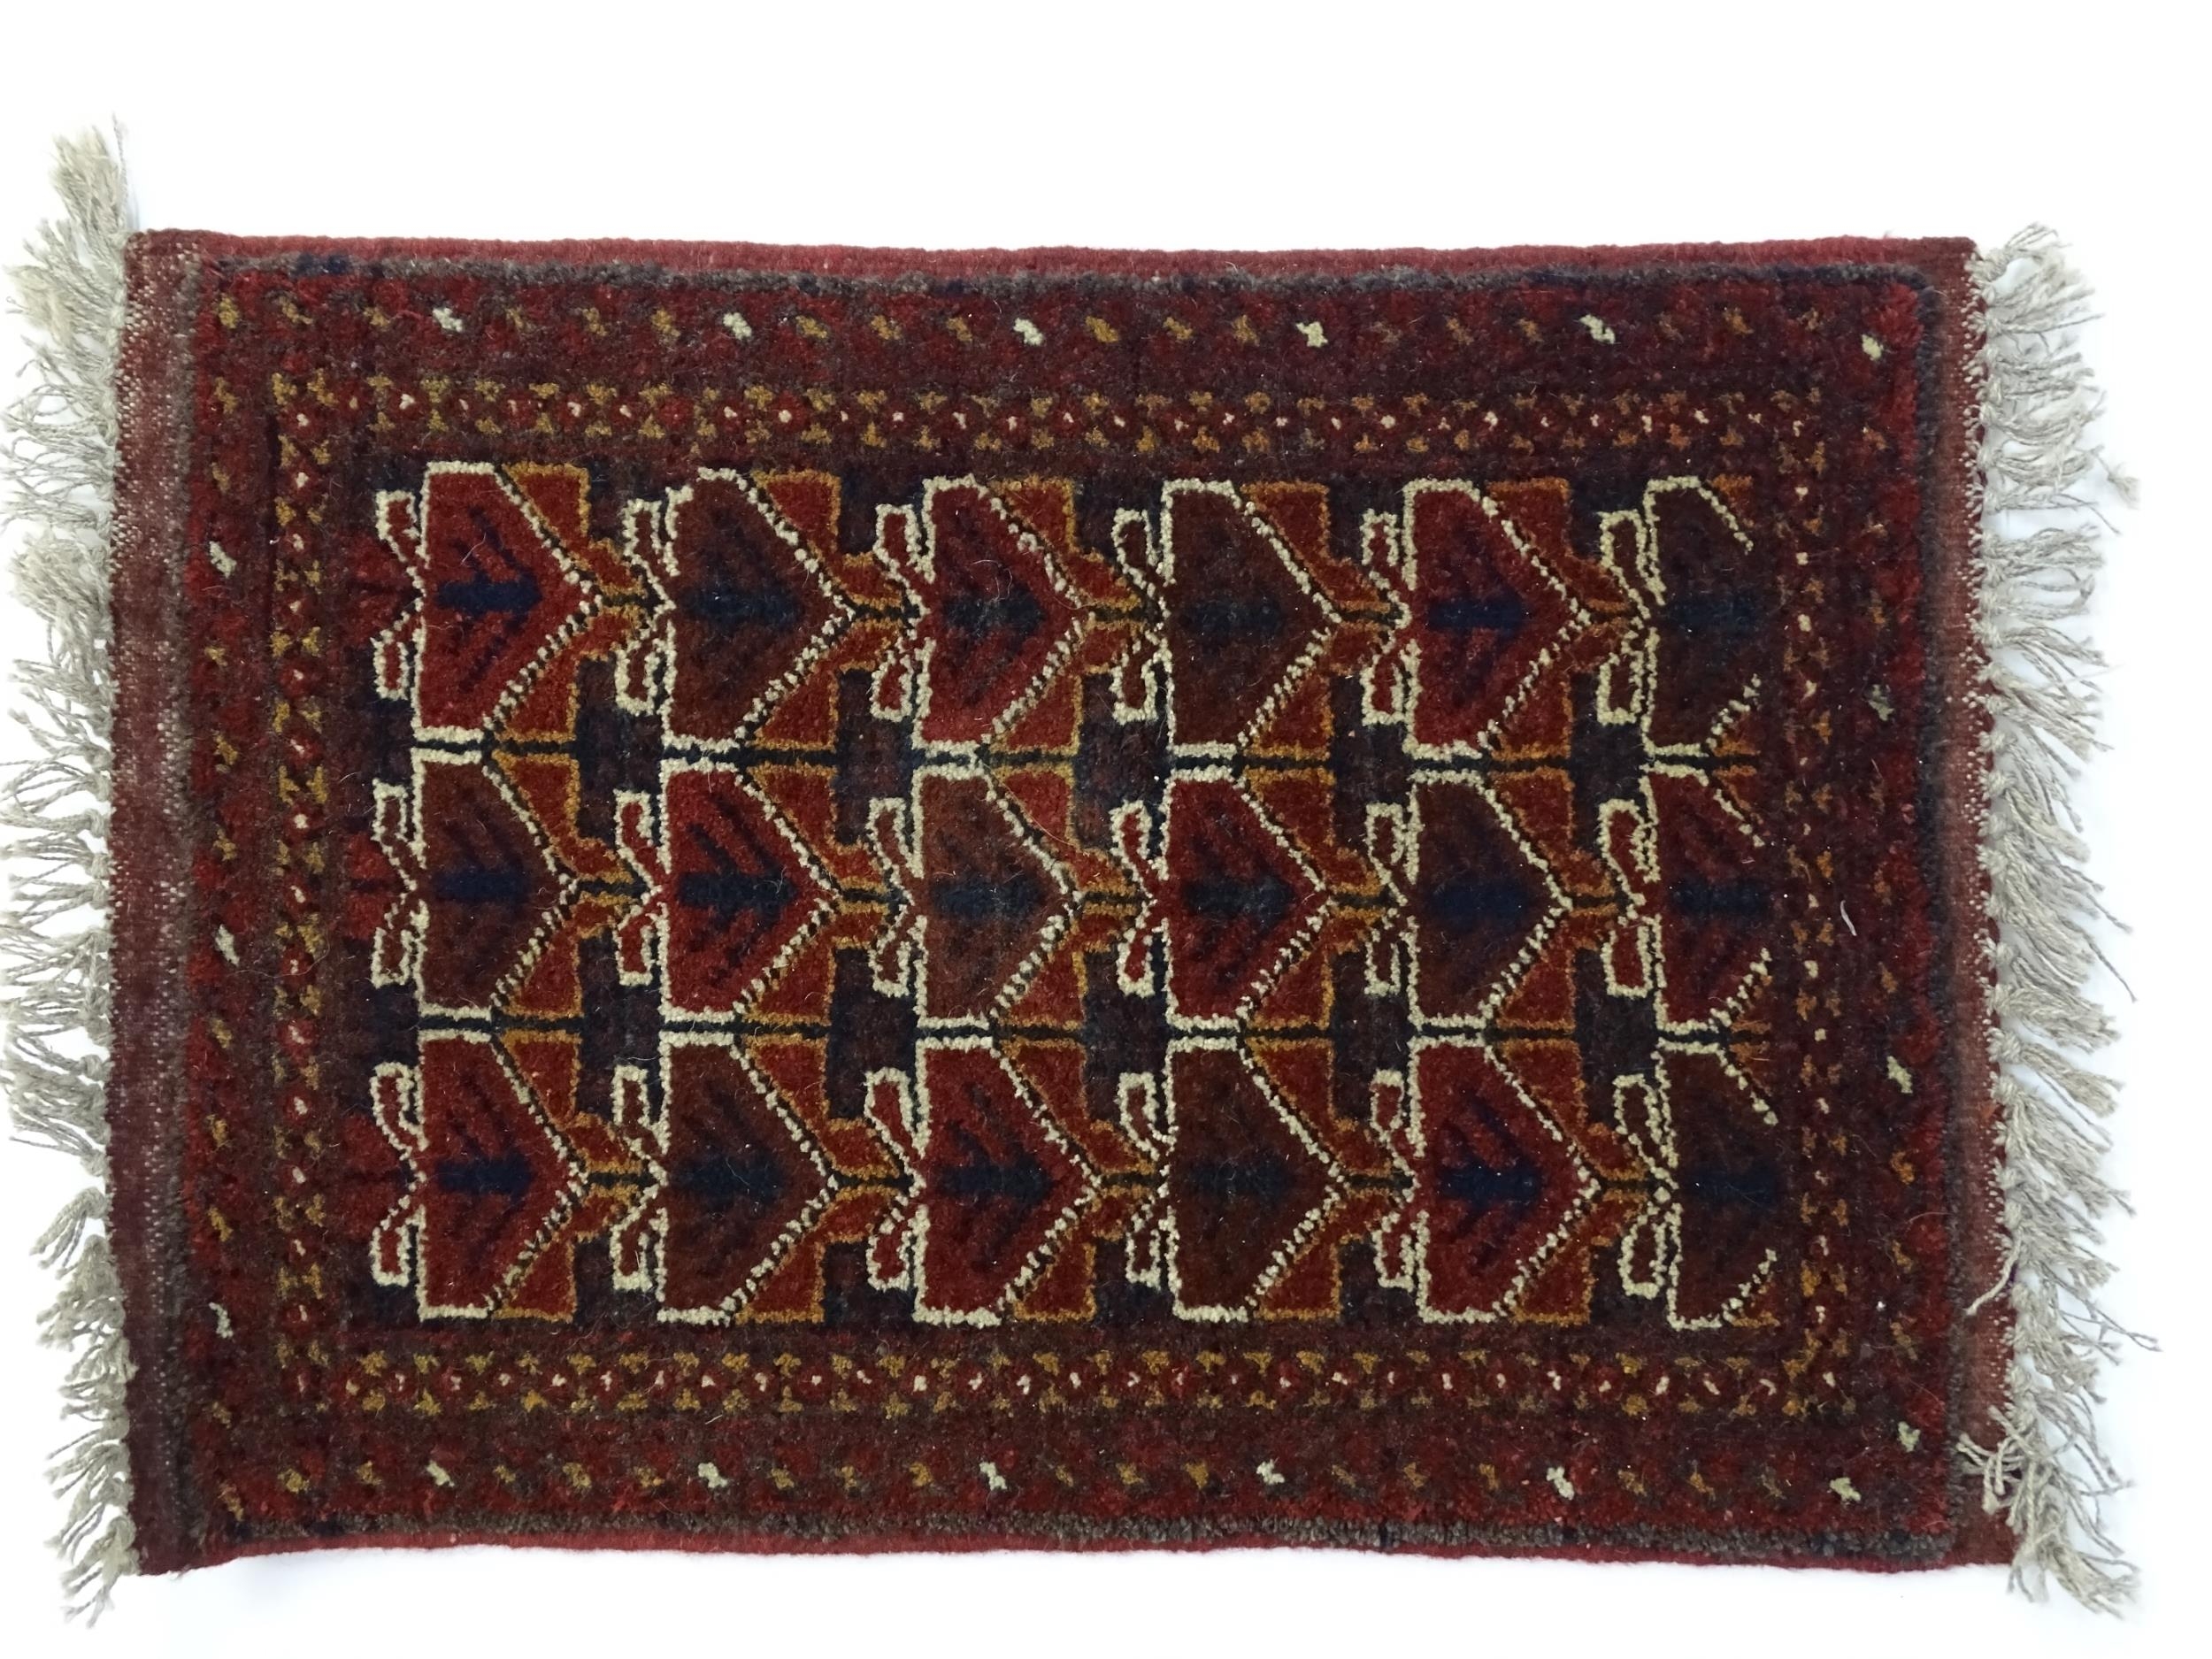 Carpets / Rugs: Two small rugs, one with burgundy ground with repeating motifs, the other with - Image 4 of 6